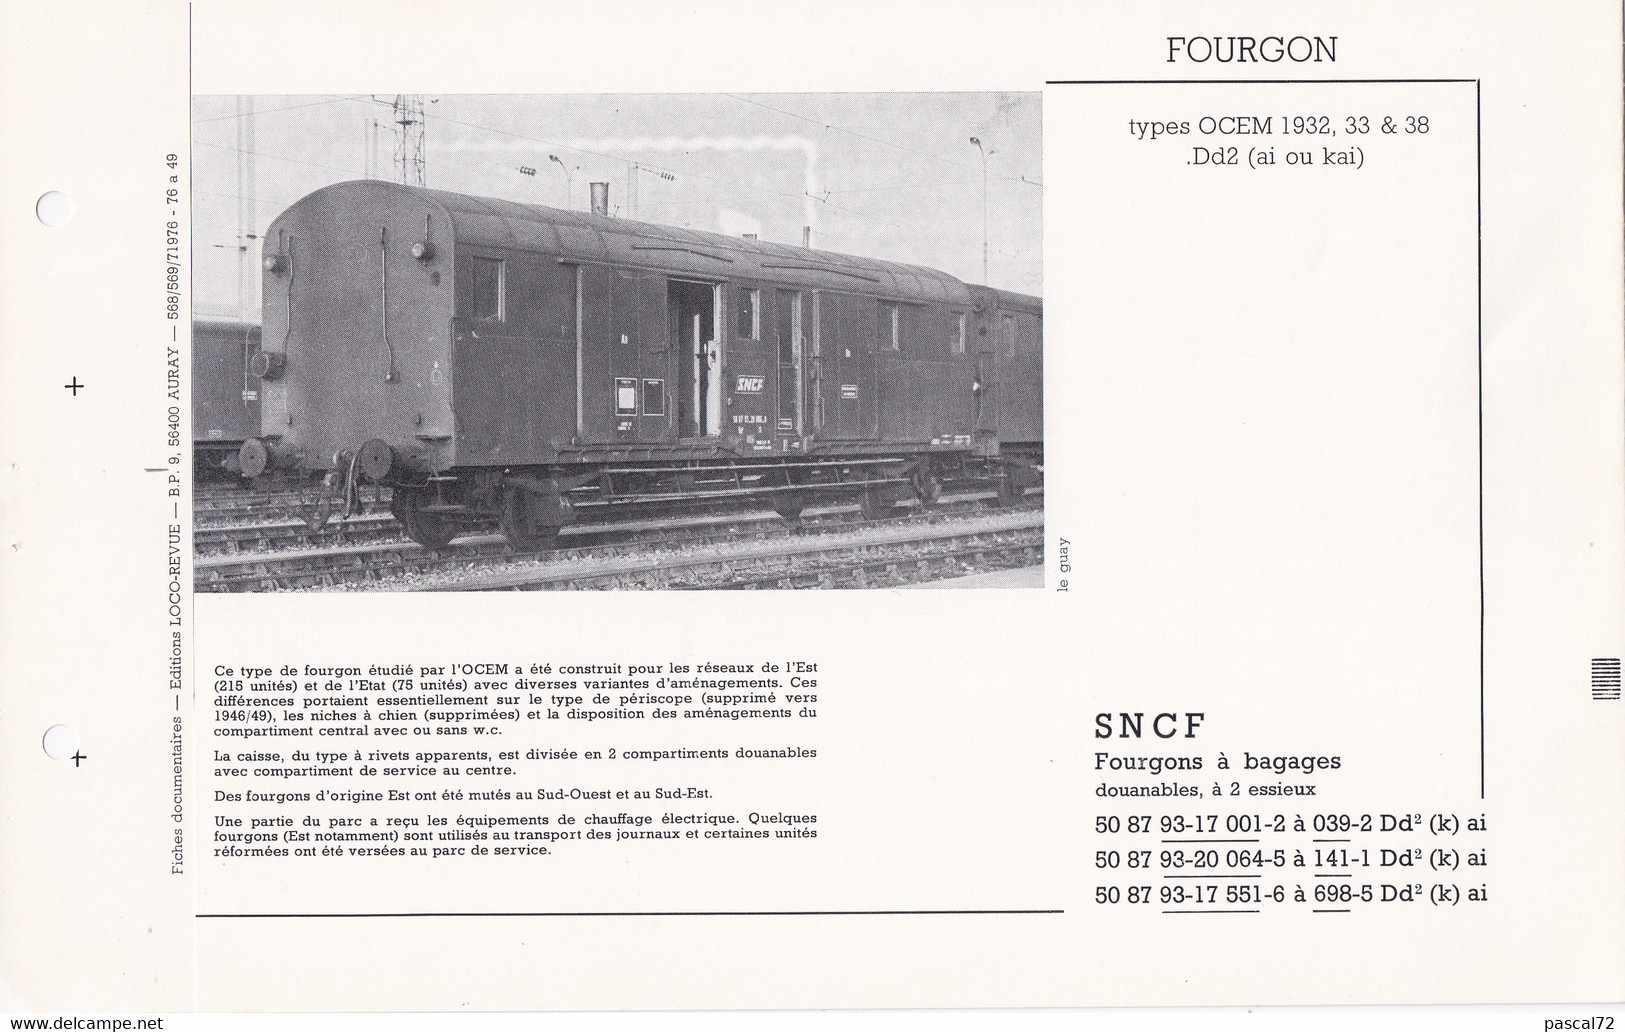 FOURGON TYPES OCEM FICHE DOCUMENTAIRE DOUBLE LOCO REVUE N° 588/589 JUILLET 1976 - Francese